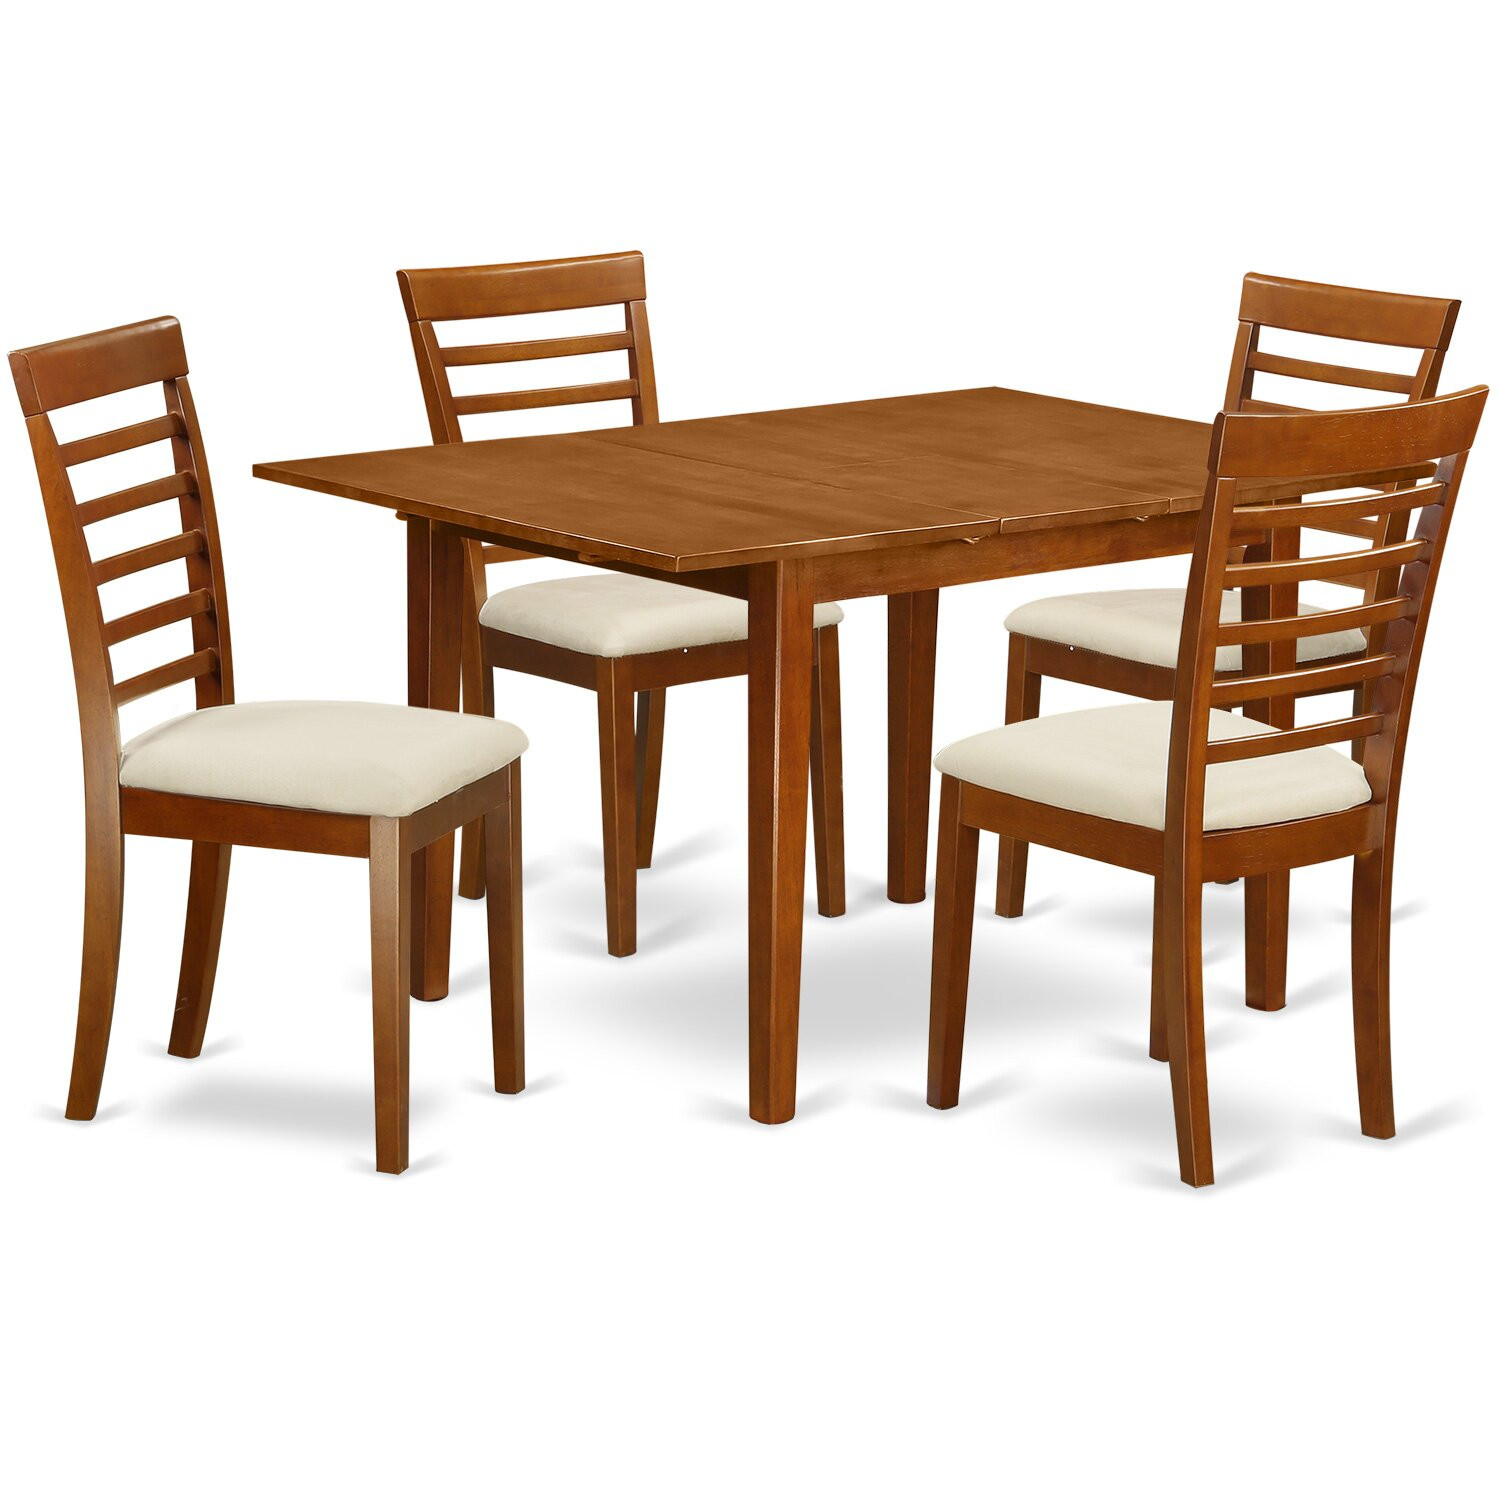 Wayfair Small Kitchen Tables
 East West Milan 5 Piece Dining Set